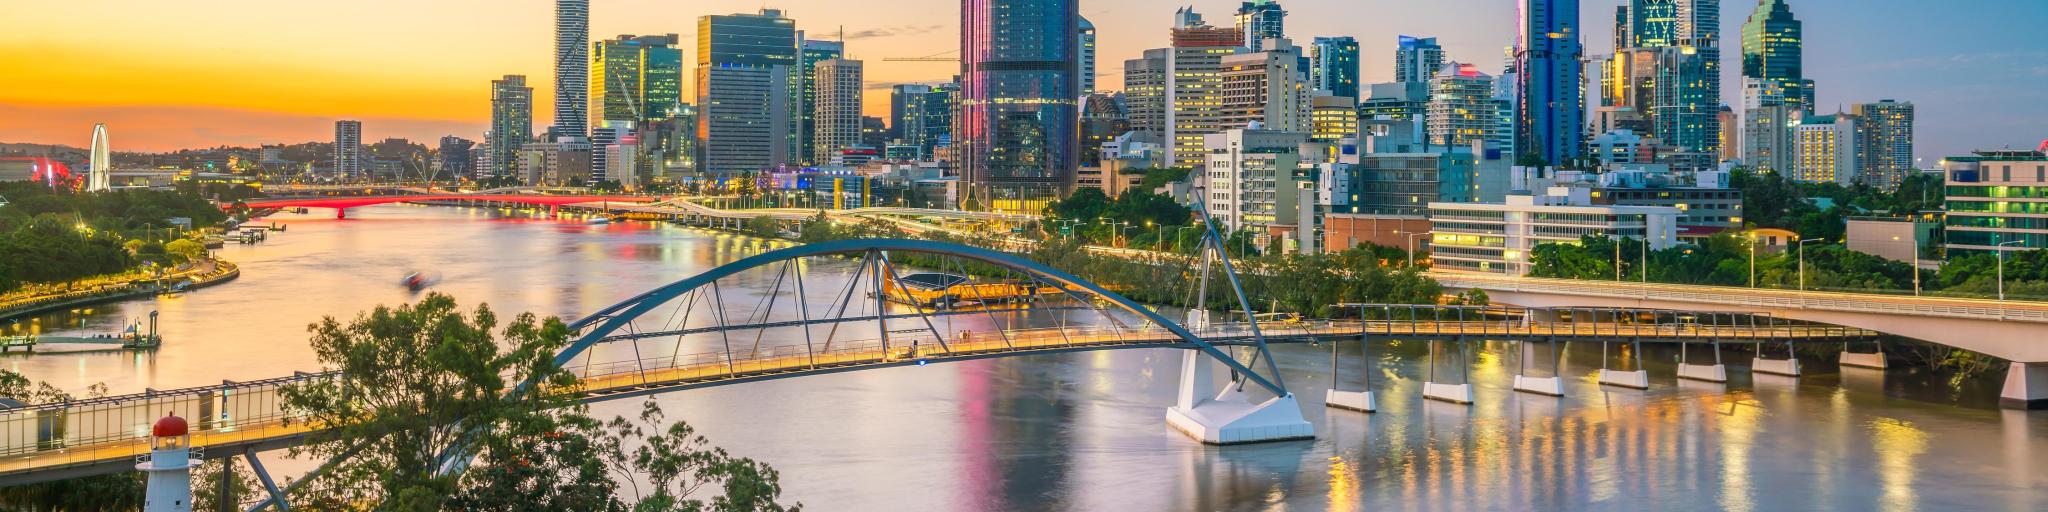 Brisbane, Australia at twilight with the city skyline in the background and the Brisbane river in the foreground. 